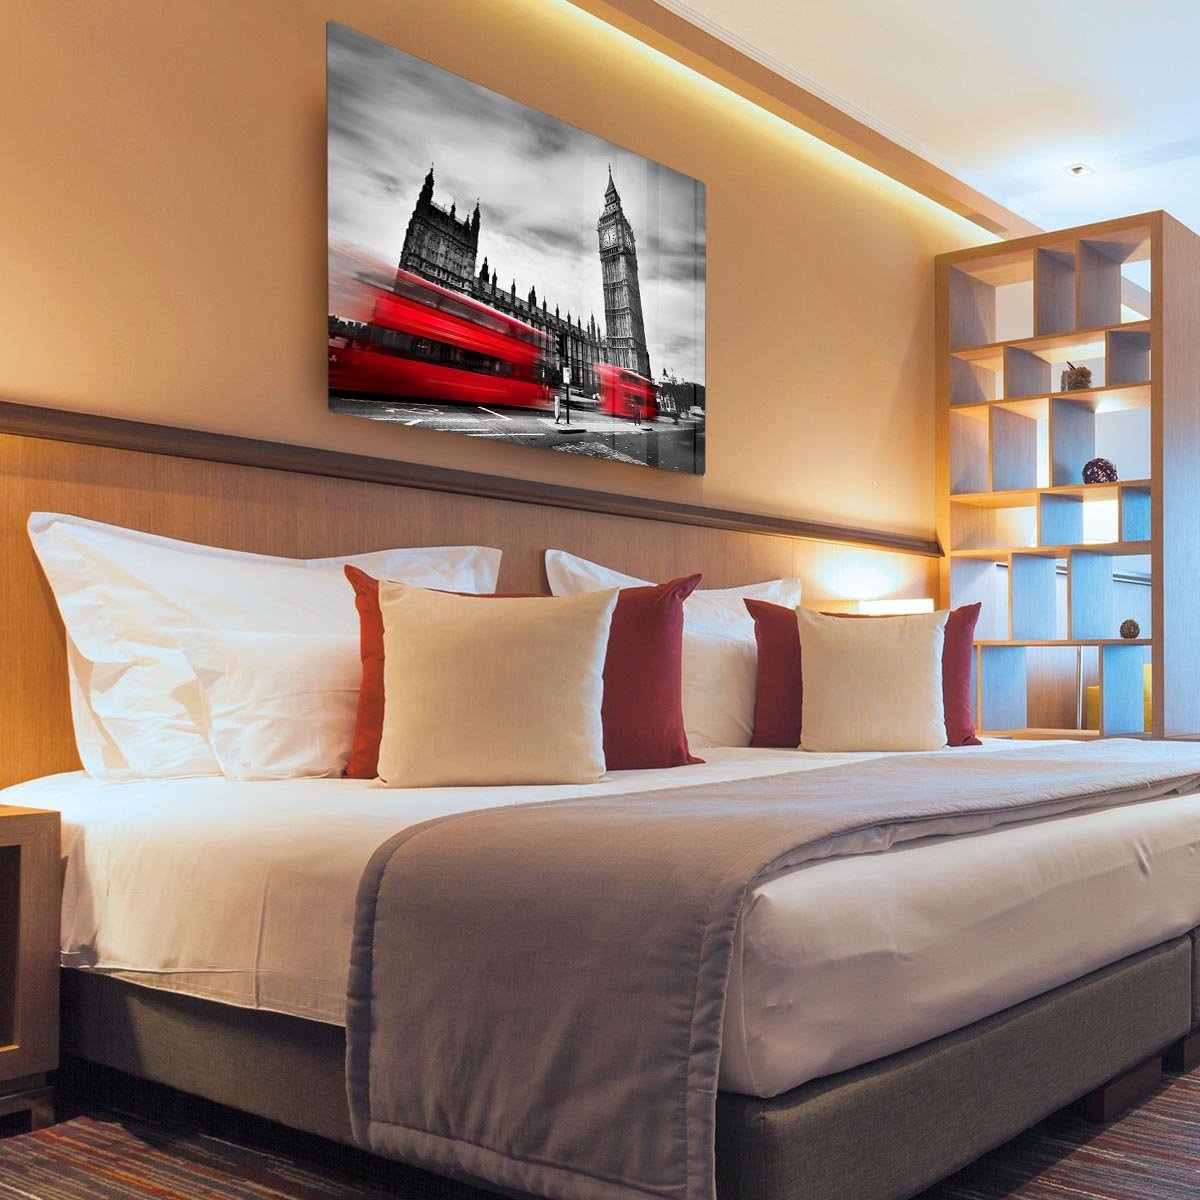 Red buses in motion and Big Ben HD Metal Print